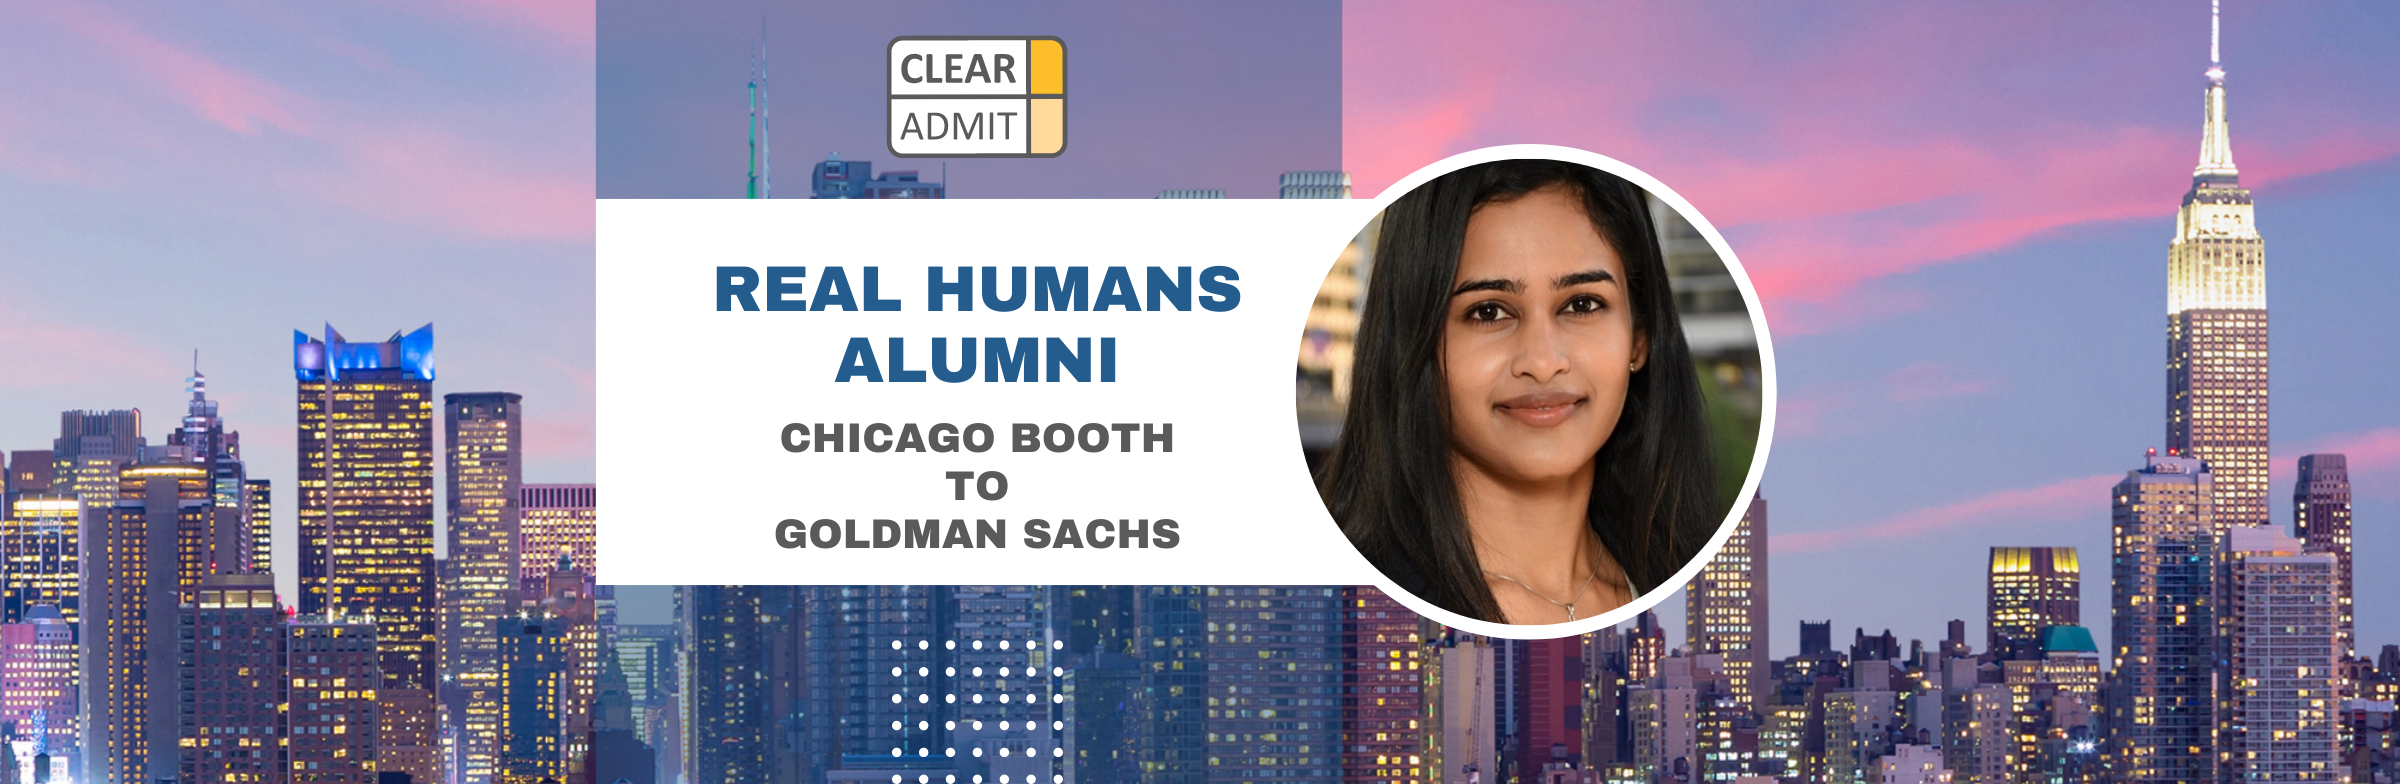 Image for Real Humans of Goldman Sachs: Likita Chilukuri, Chicago Booth MBA ’23, Investment Banking Associate